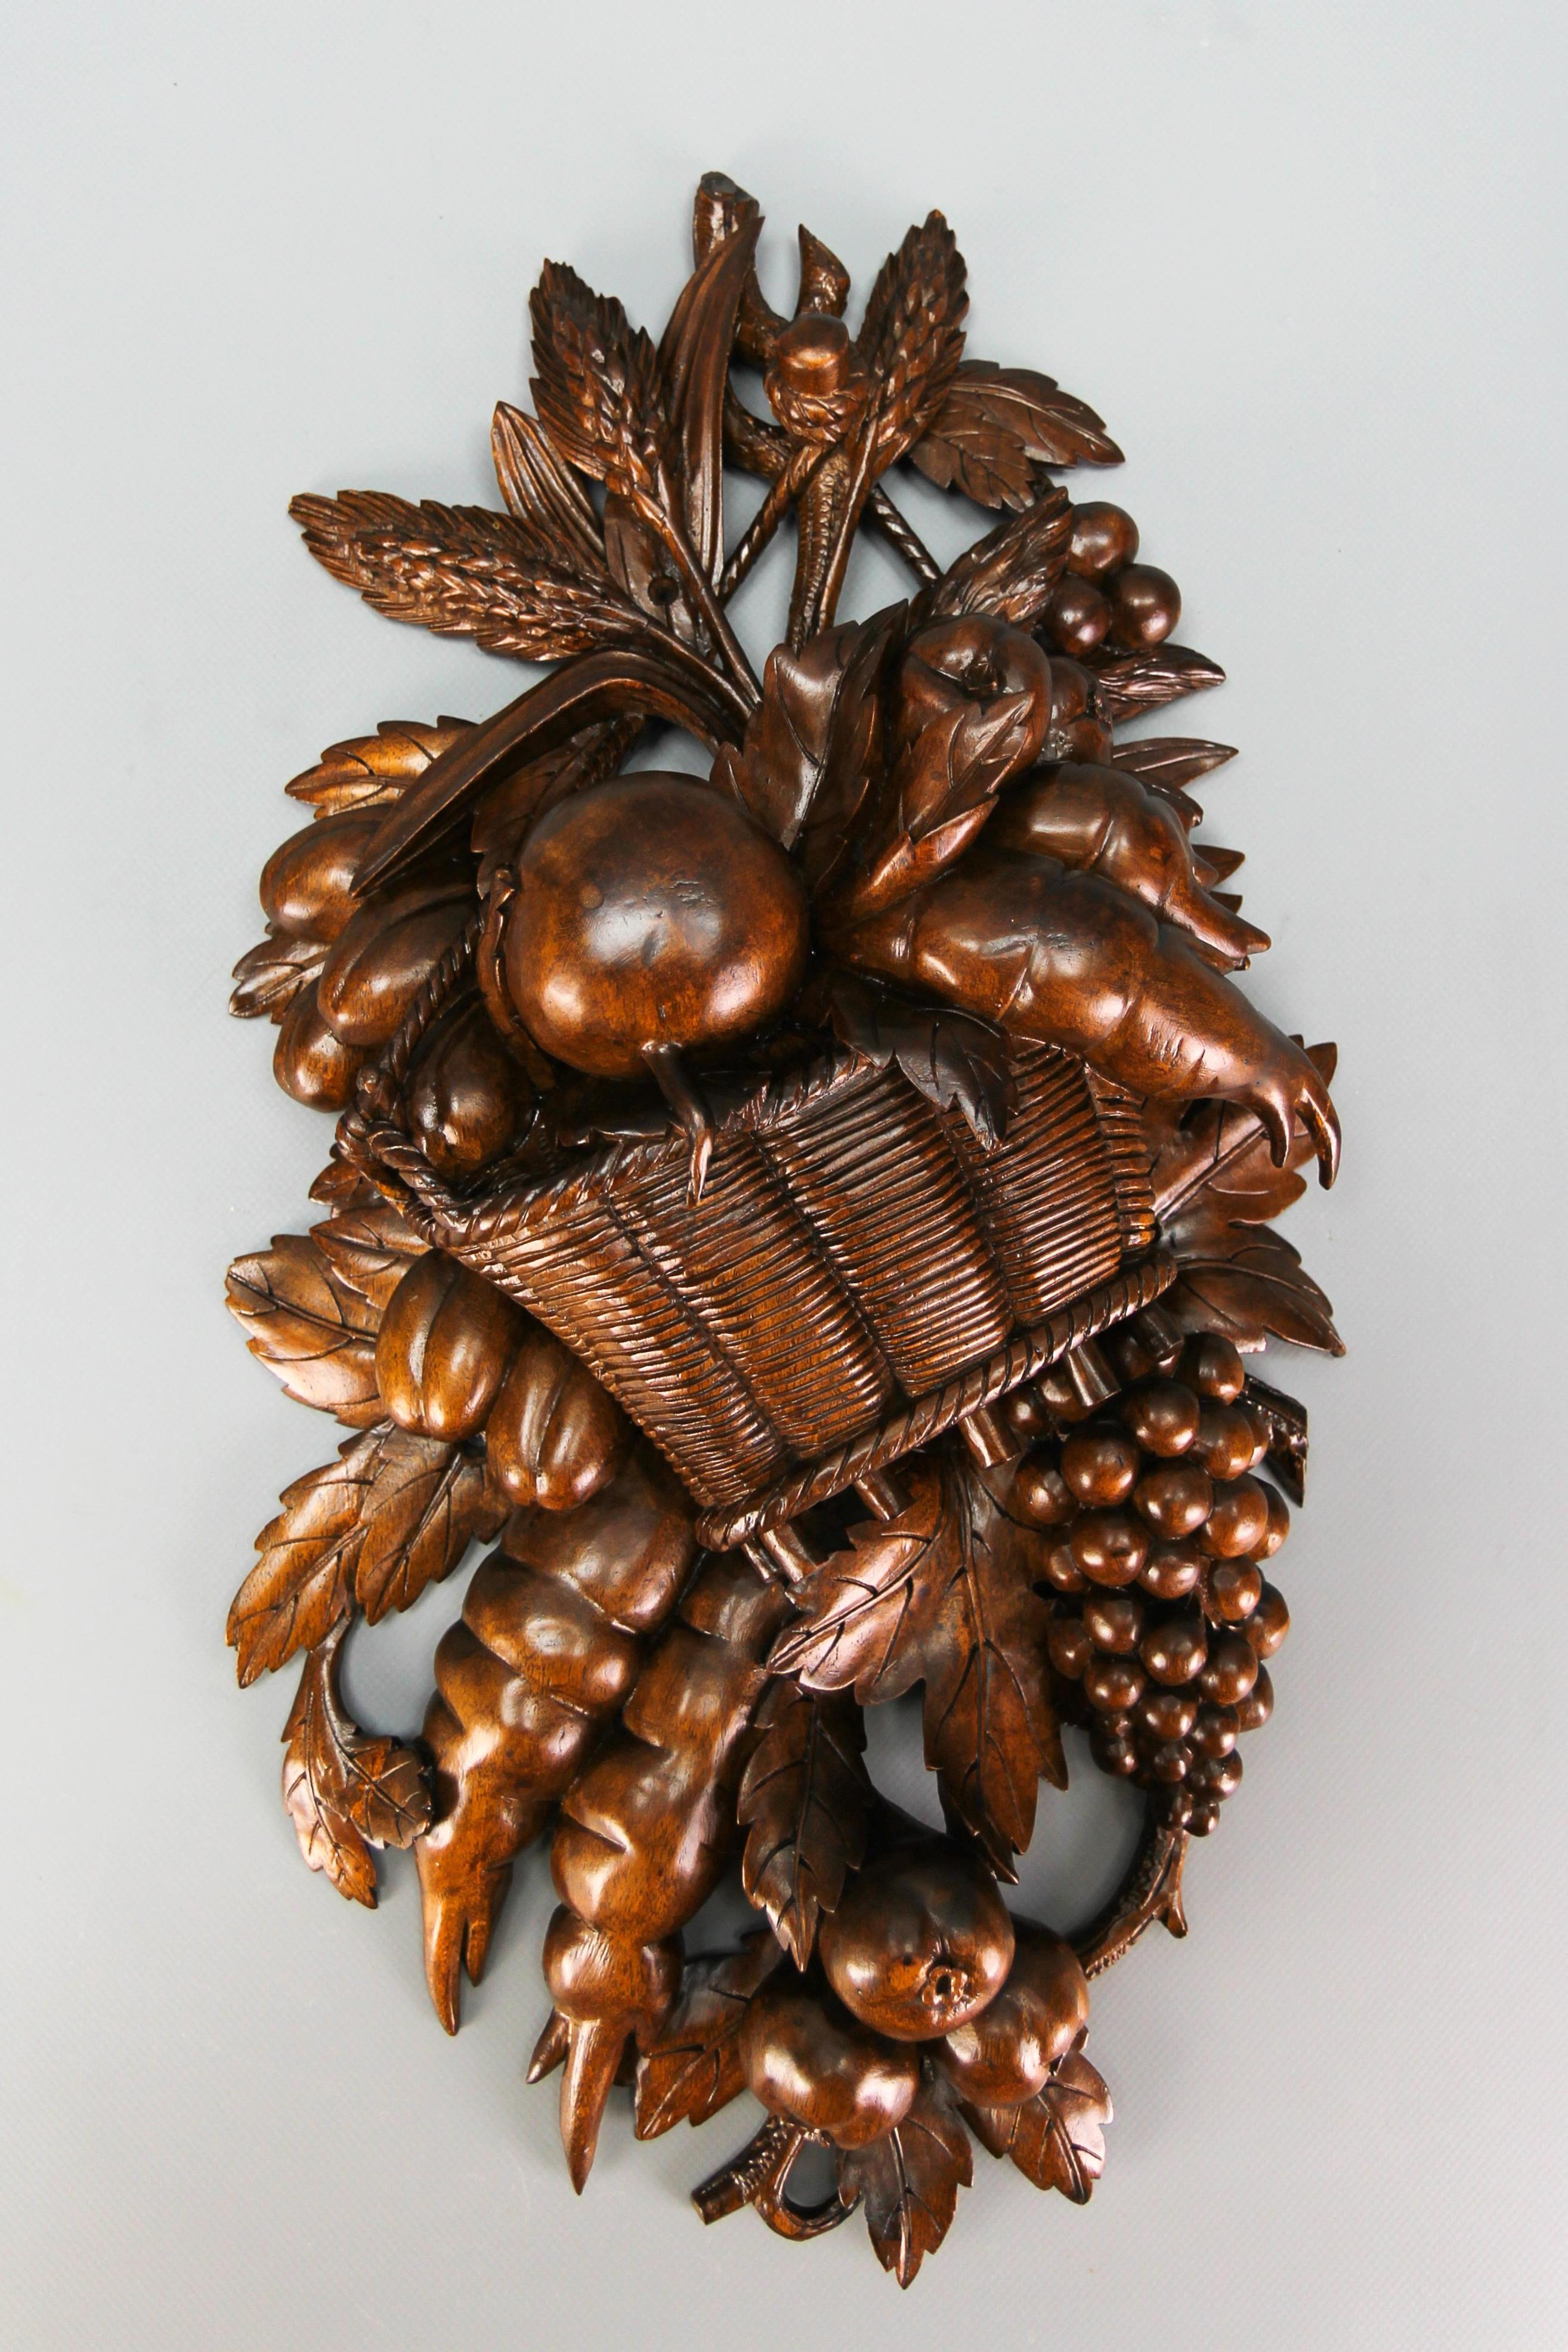 Antique hand carved walnut wall plaque fruits and vegetables, Germany, early 20th century.
This absolutely gorgeous masterfully carved wall decoration from the early 20th century features a basket with fruits, vegetables, grain, and a